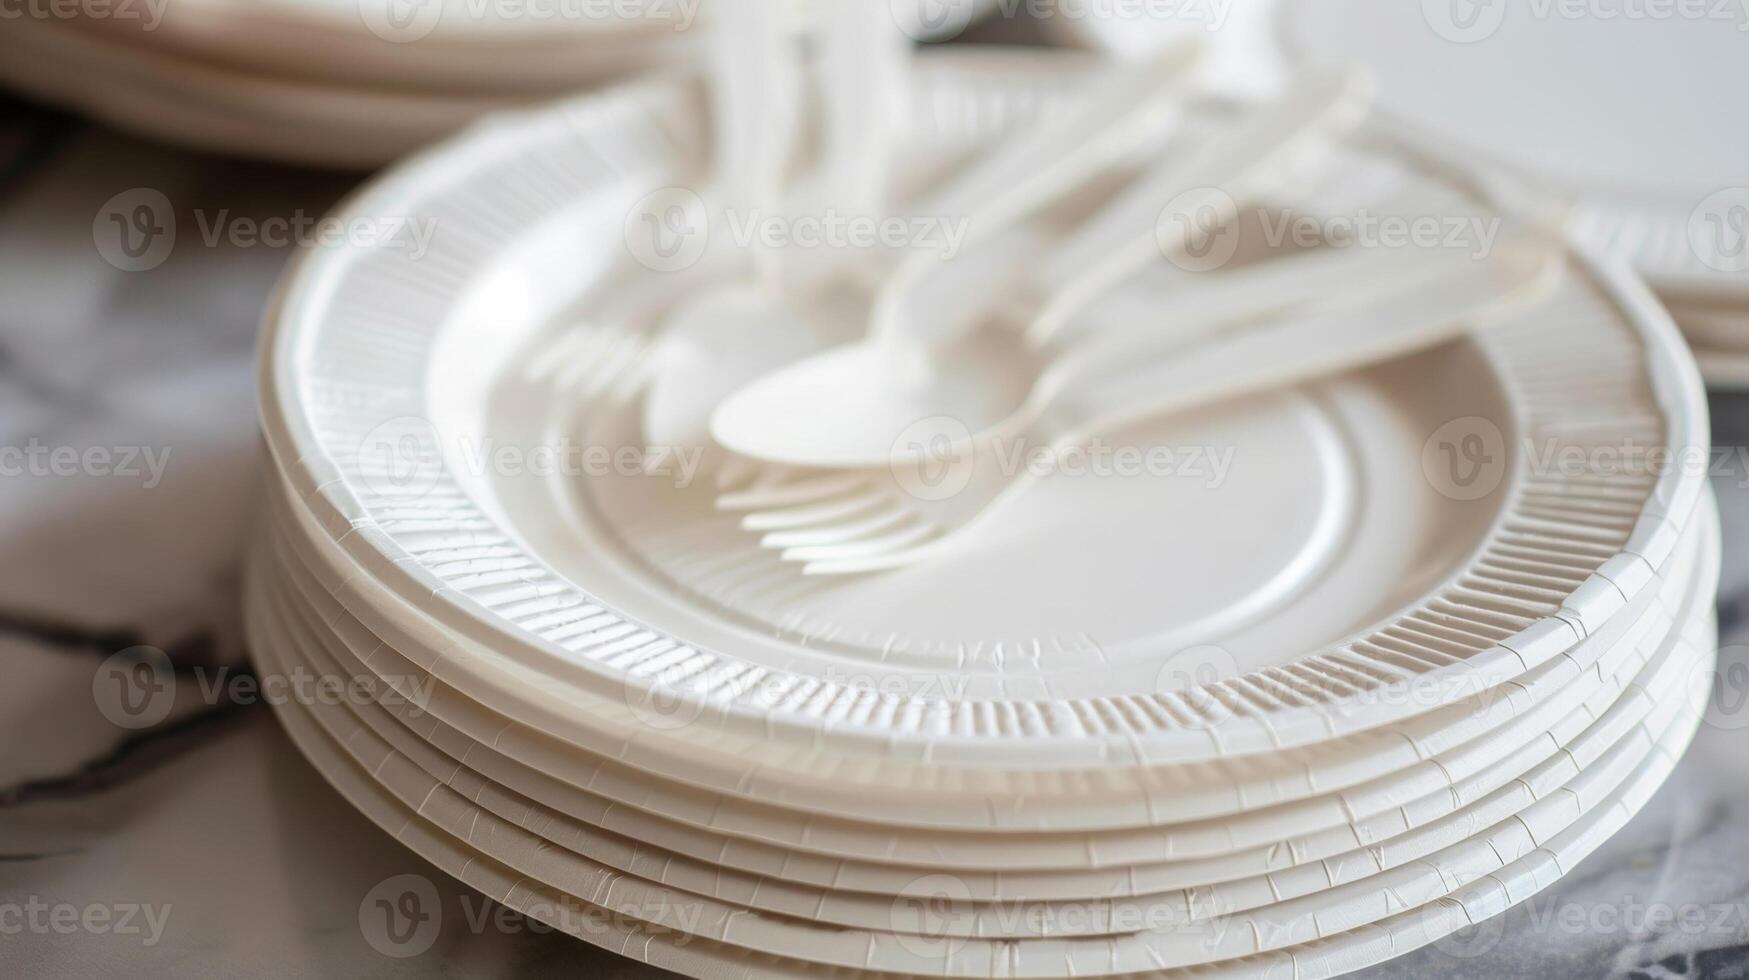 A stack of paper plates and plastic utensils ready to be used for the picnic photo